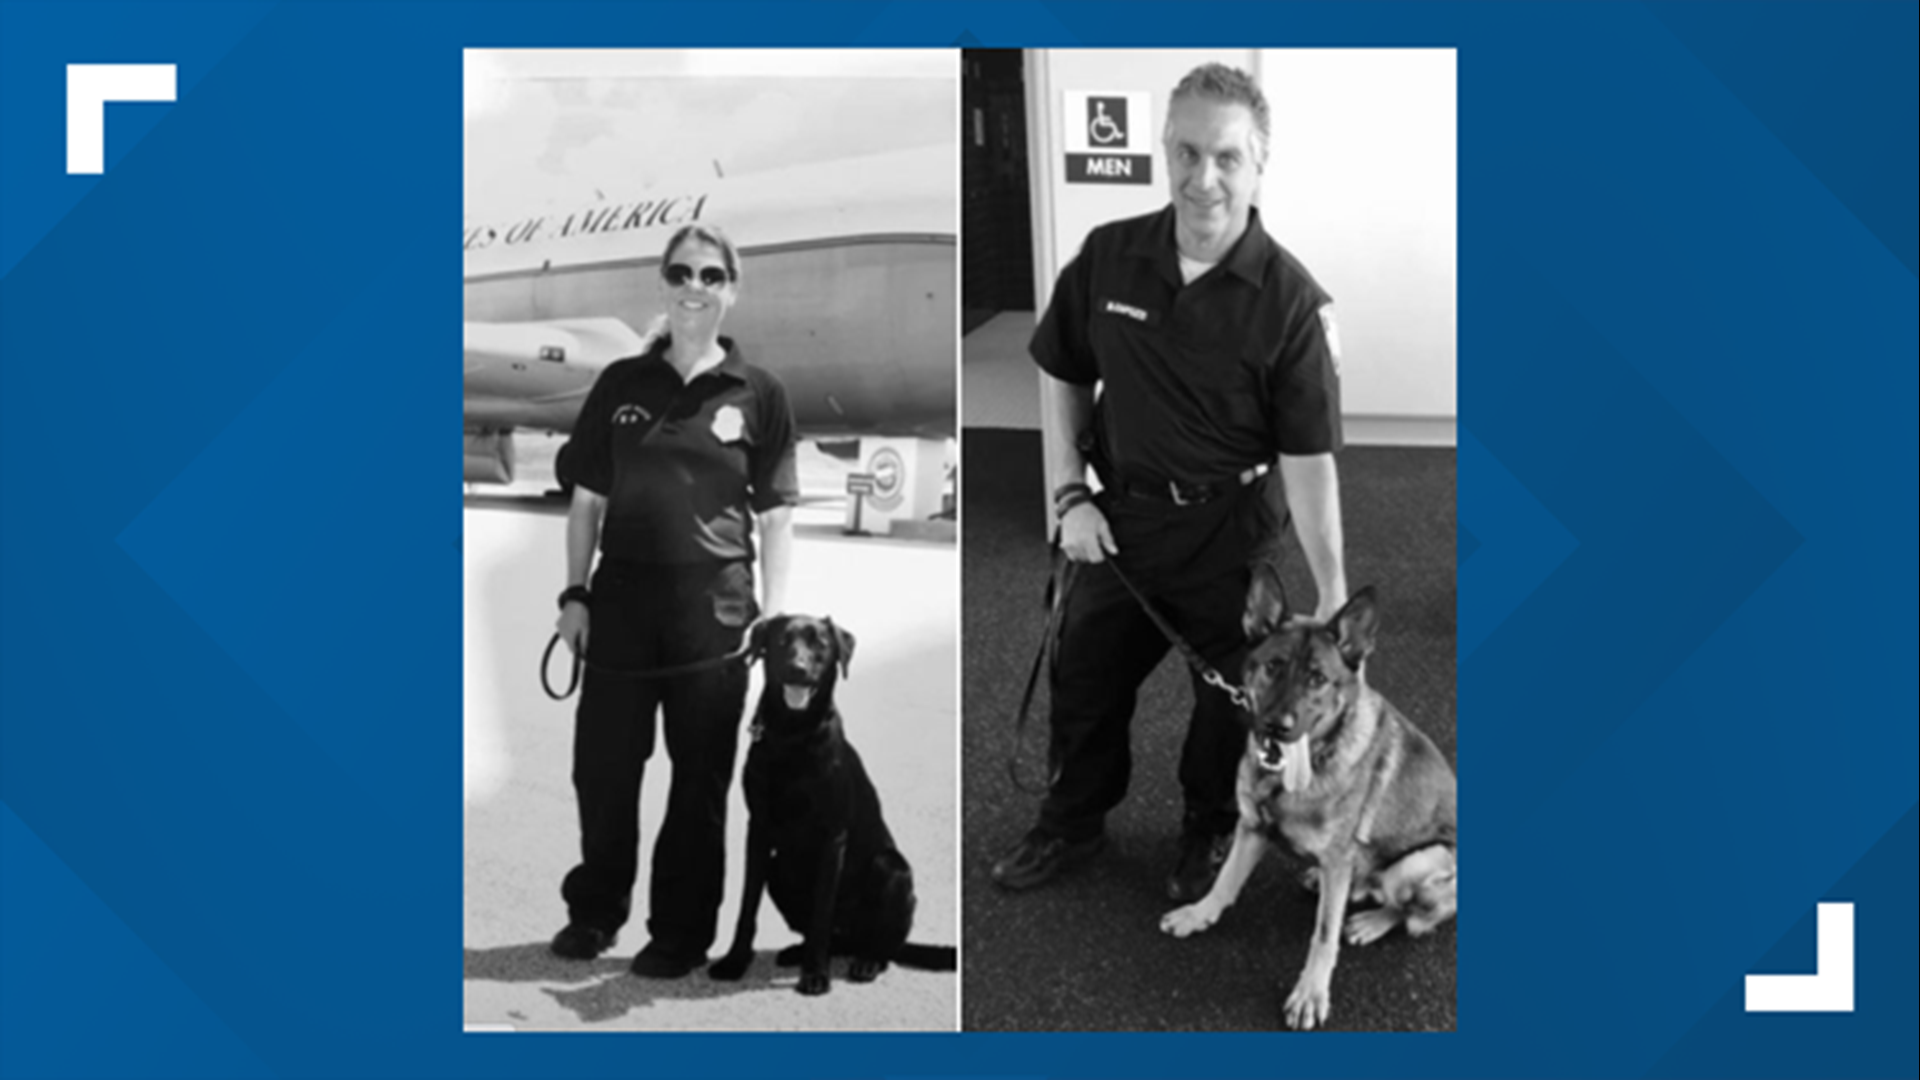 K9 Harvey and K0 Dok will assist with explosion detection during their stay in Tampa.